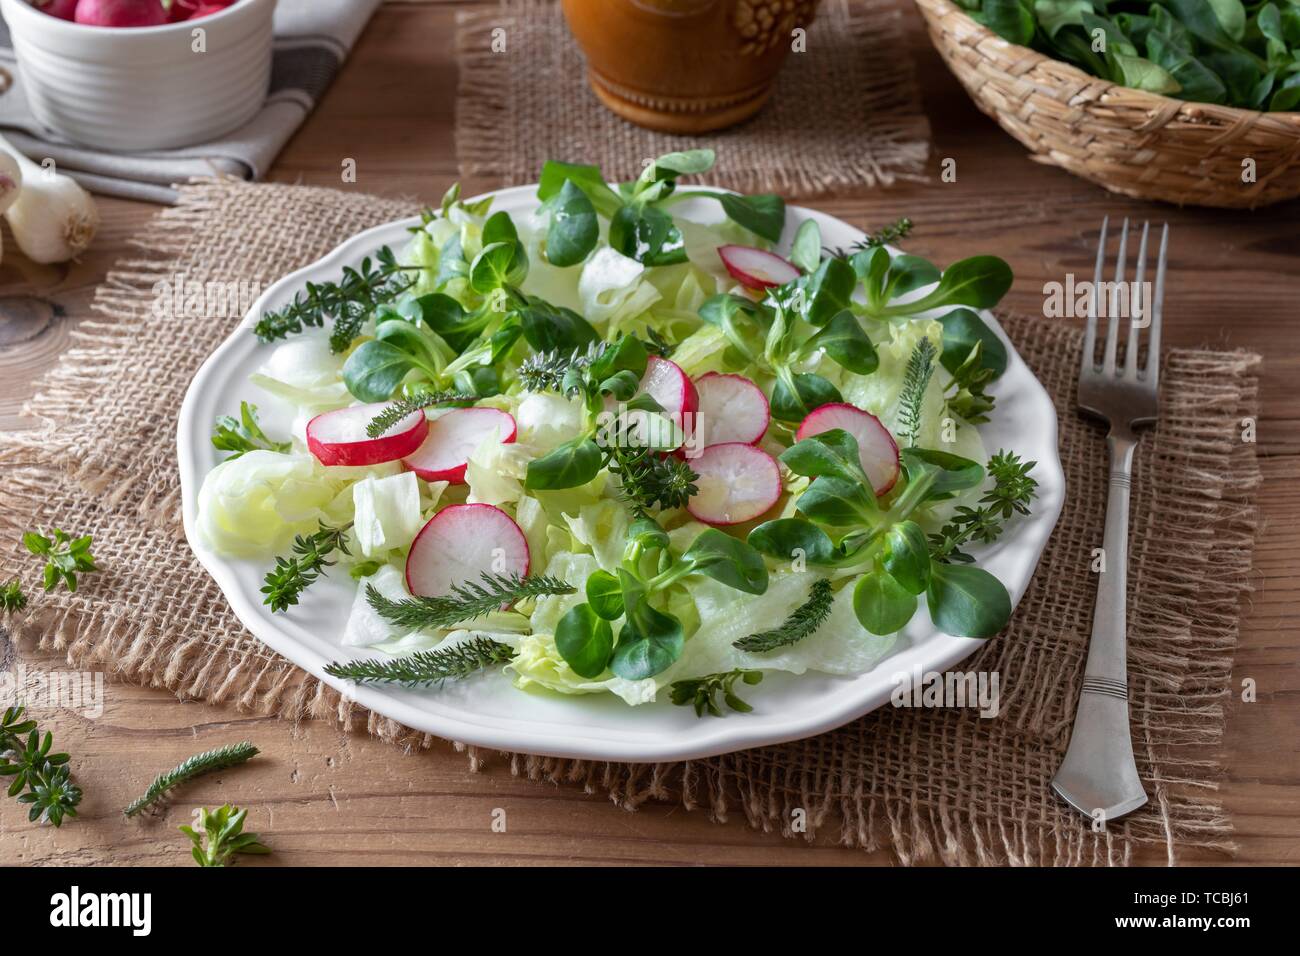 Spring salad with wild edible plants such as chickweed, bedstraw and yarrow. Stock Photo